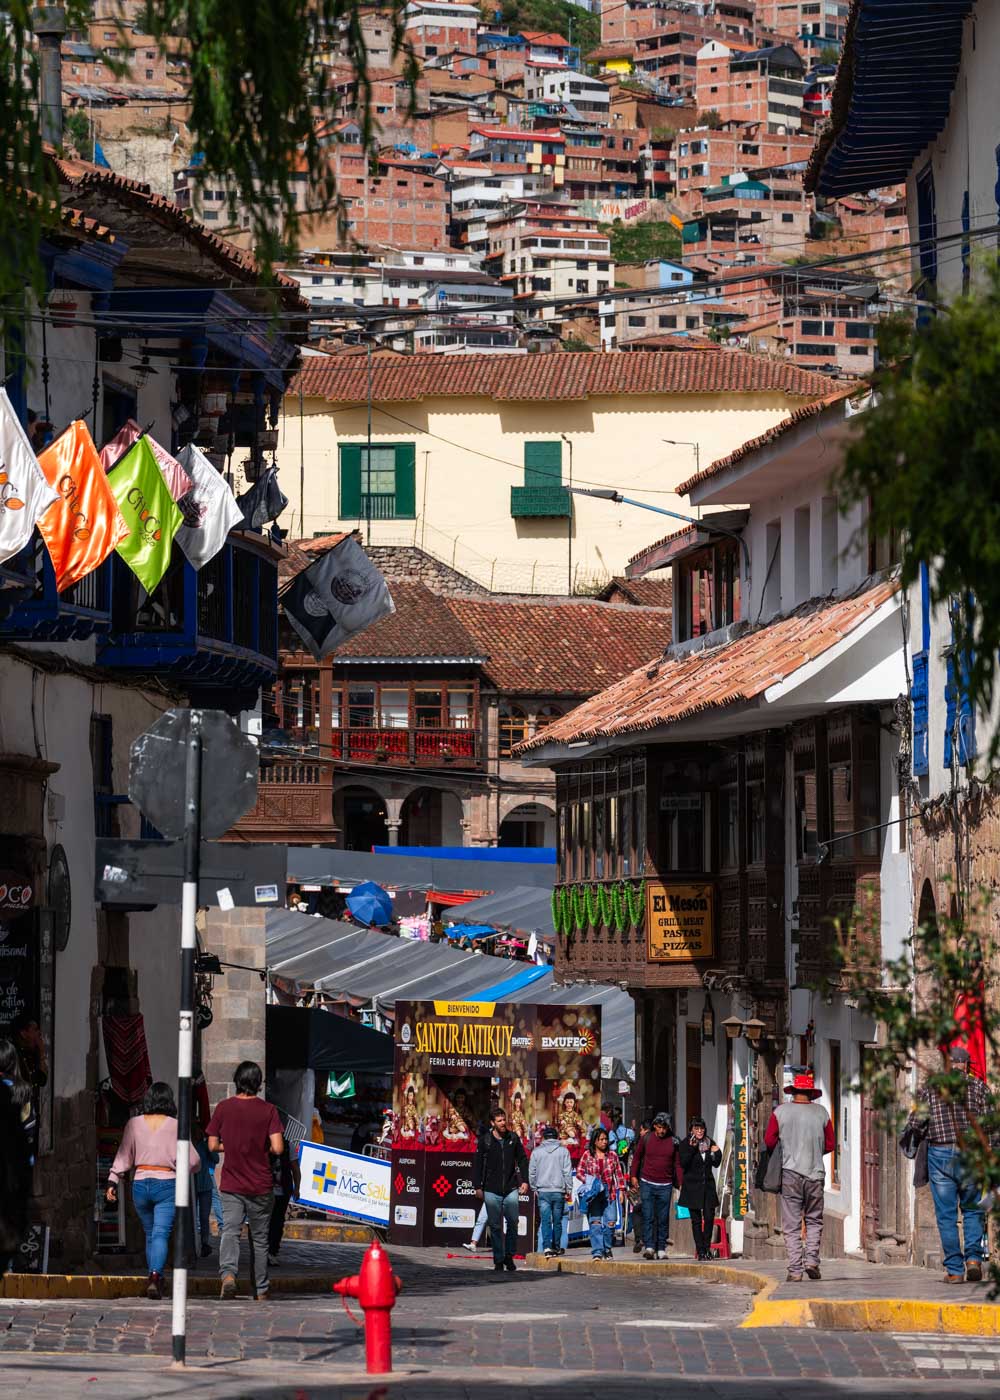 Tourists walking towards Plaza de Armas in Cusco with a markets on the square and a view of favelas in the backgroud.